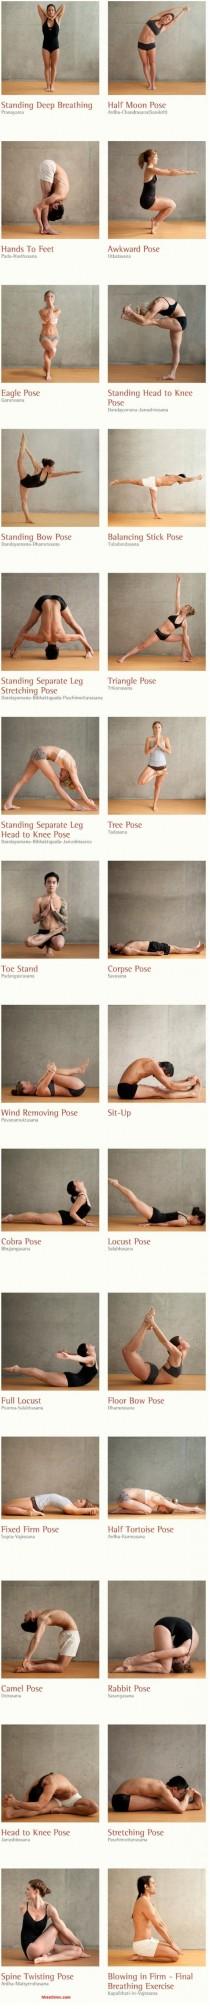 wedding photo - 23 Yoga Styles Every Yoga Lover Should Know